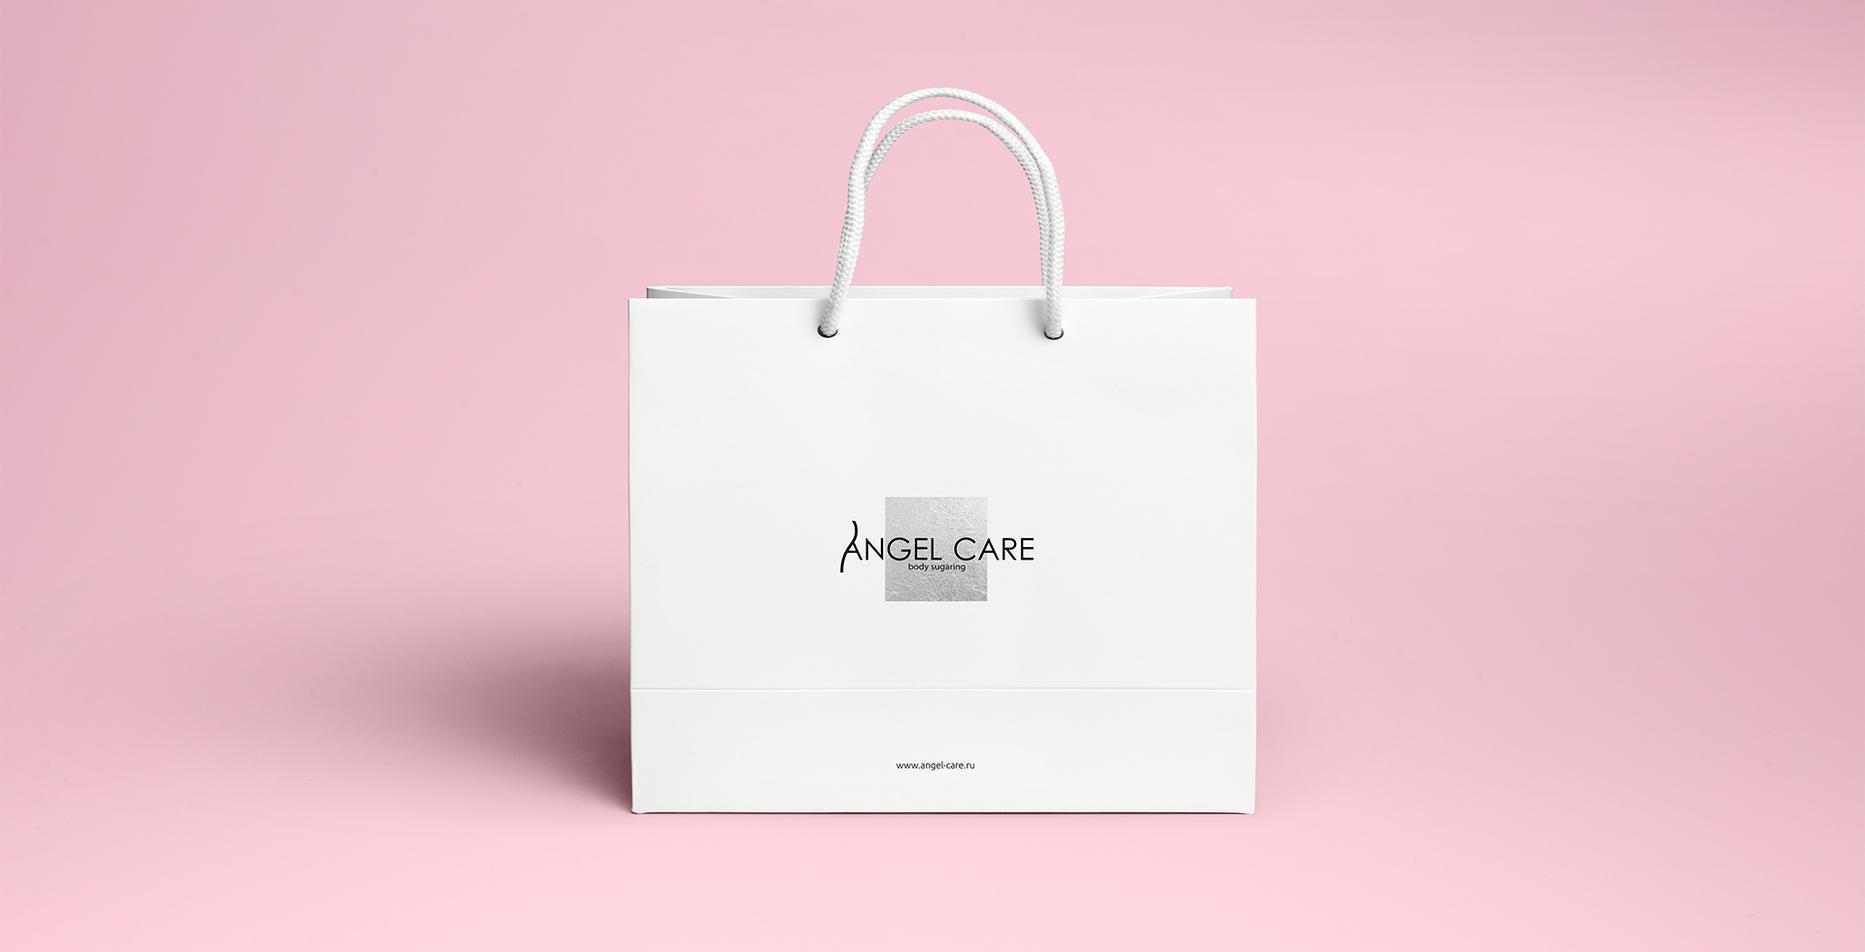 Case: logo, corporate identity, promotional products for Angel Care — Rubarb - Image - 9